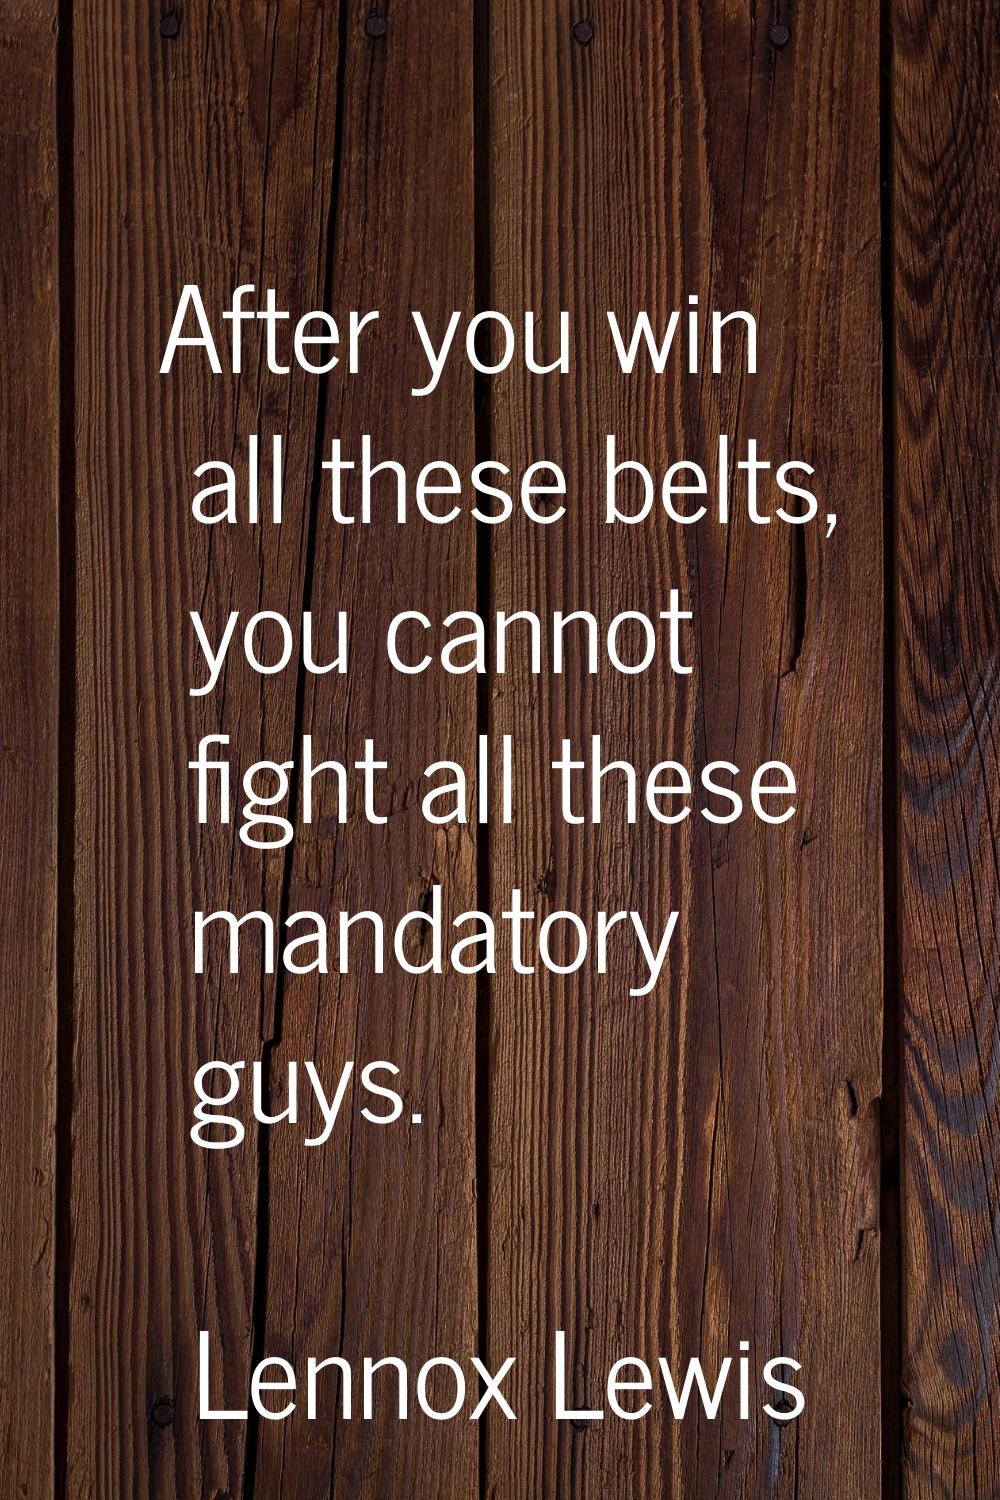 After you win all these belts, you cannot fight all these mandatory guys.